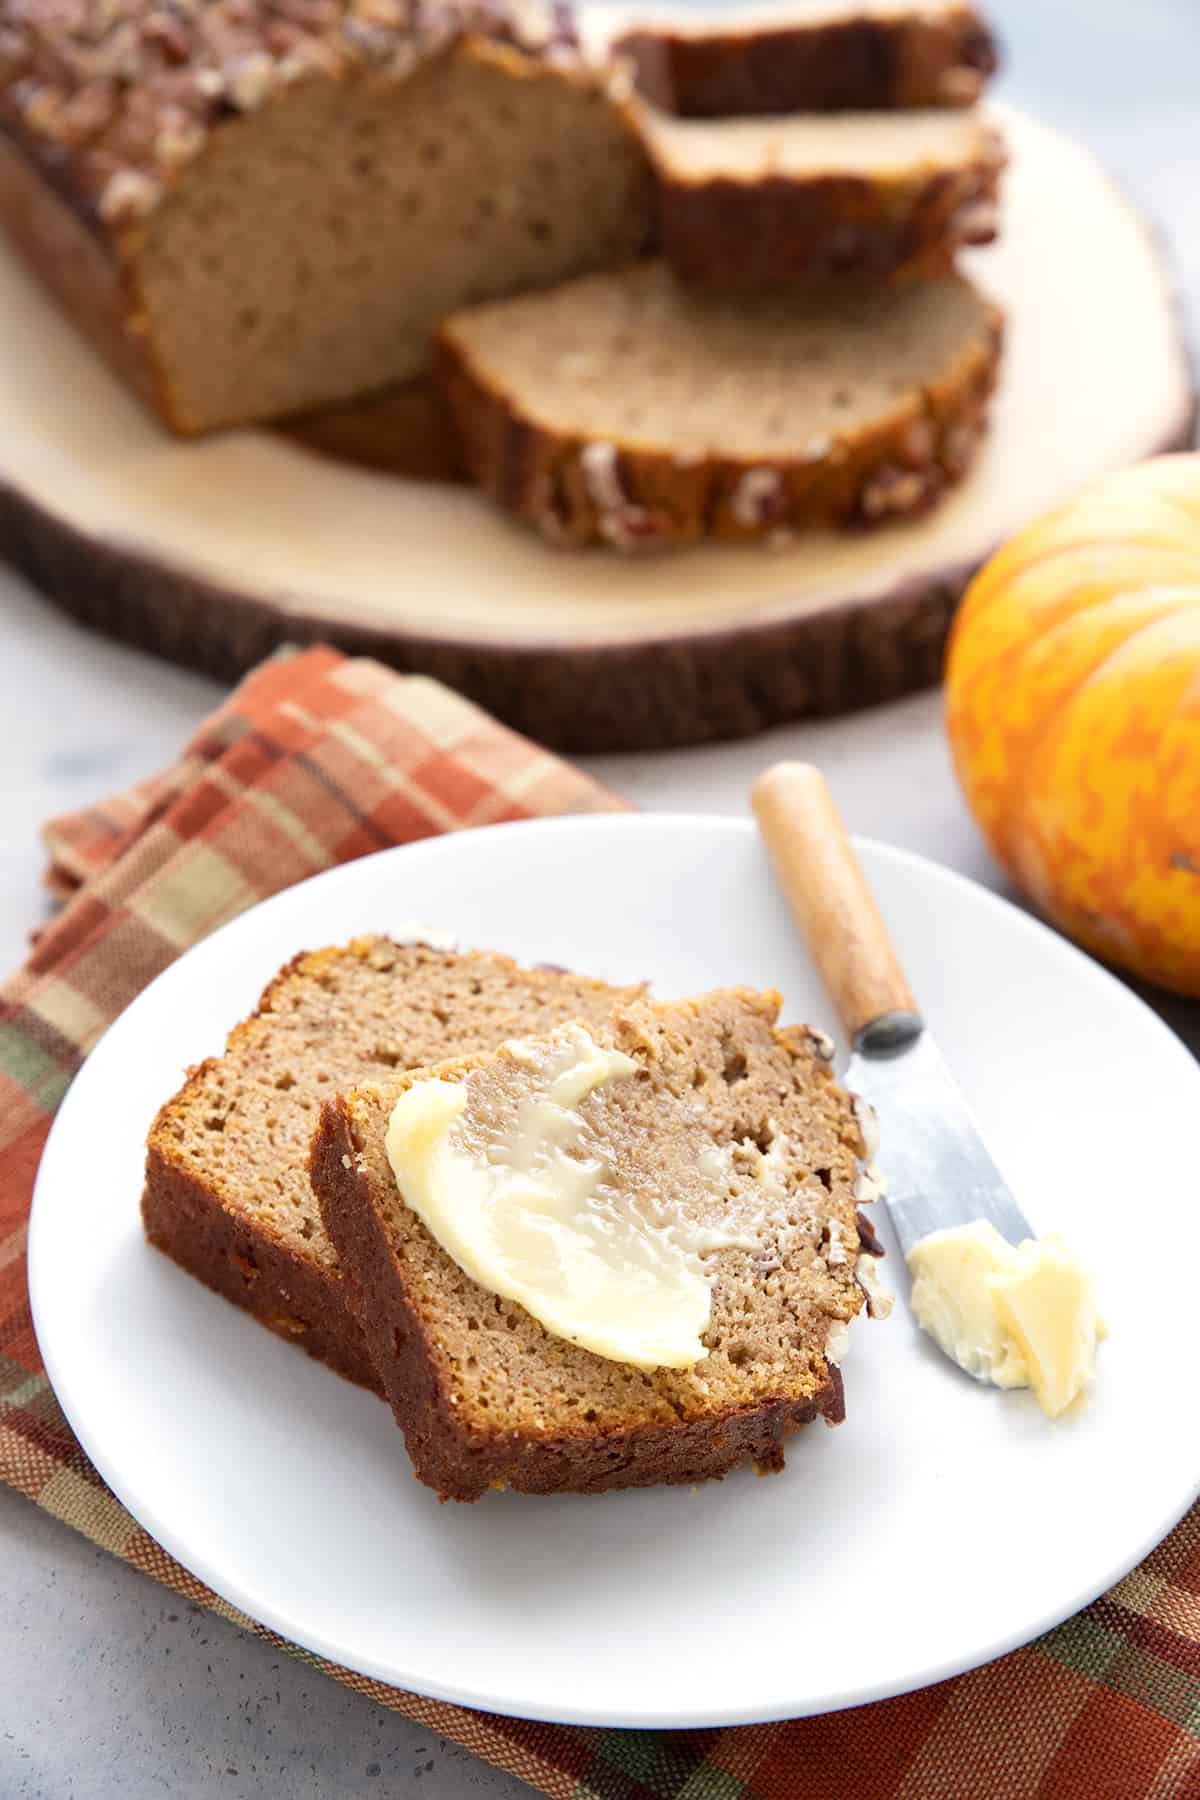 A slice of keto pumpkin bread with butter on it, on a white plate over a plaid napkin.